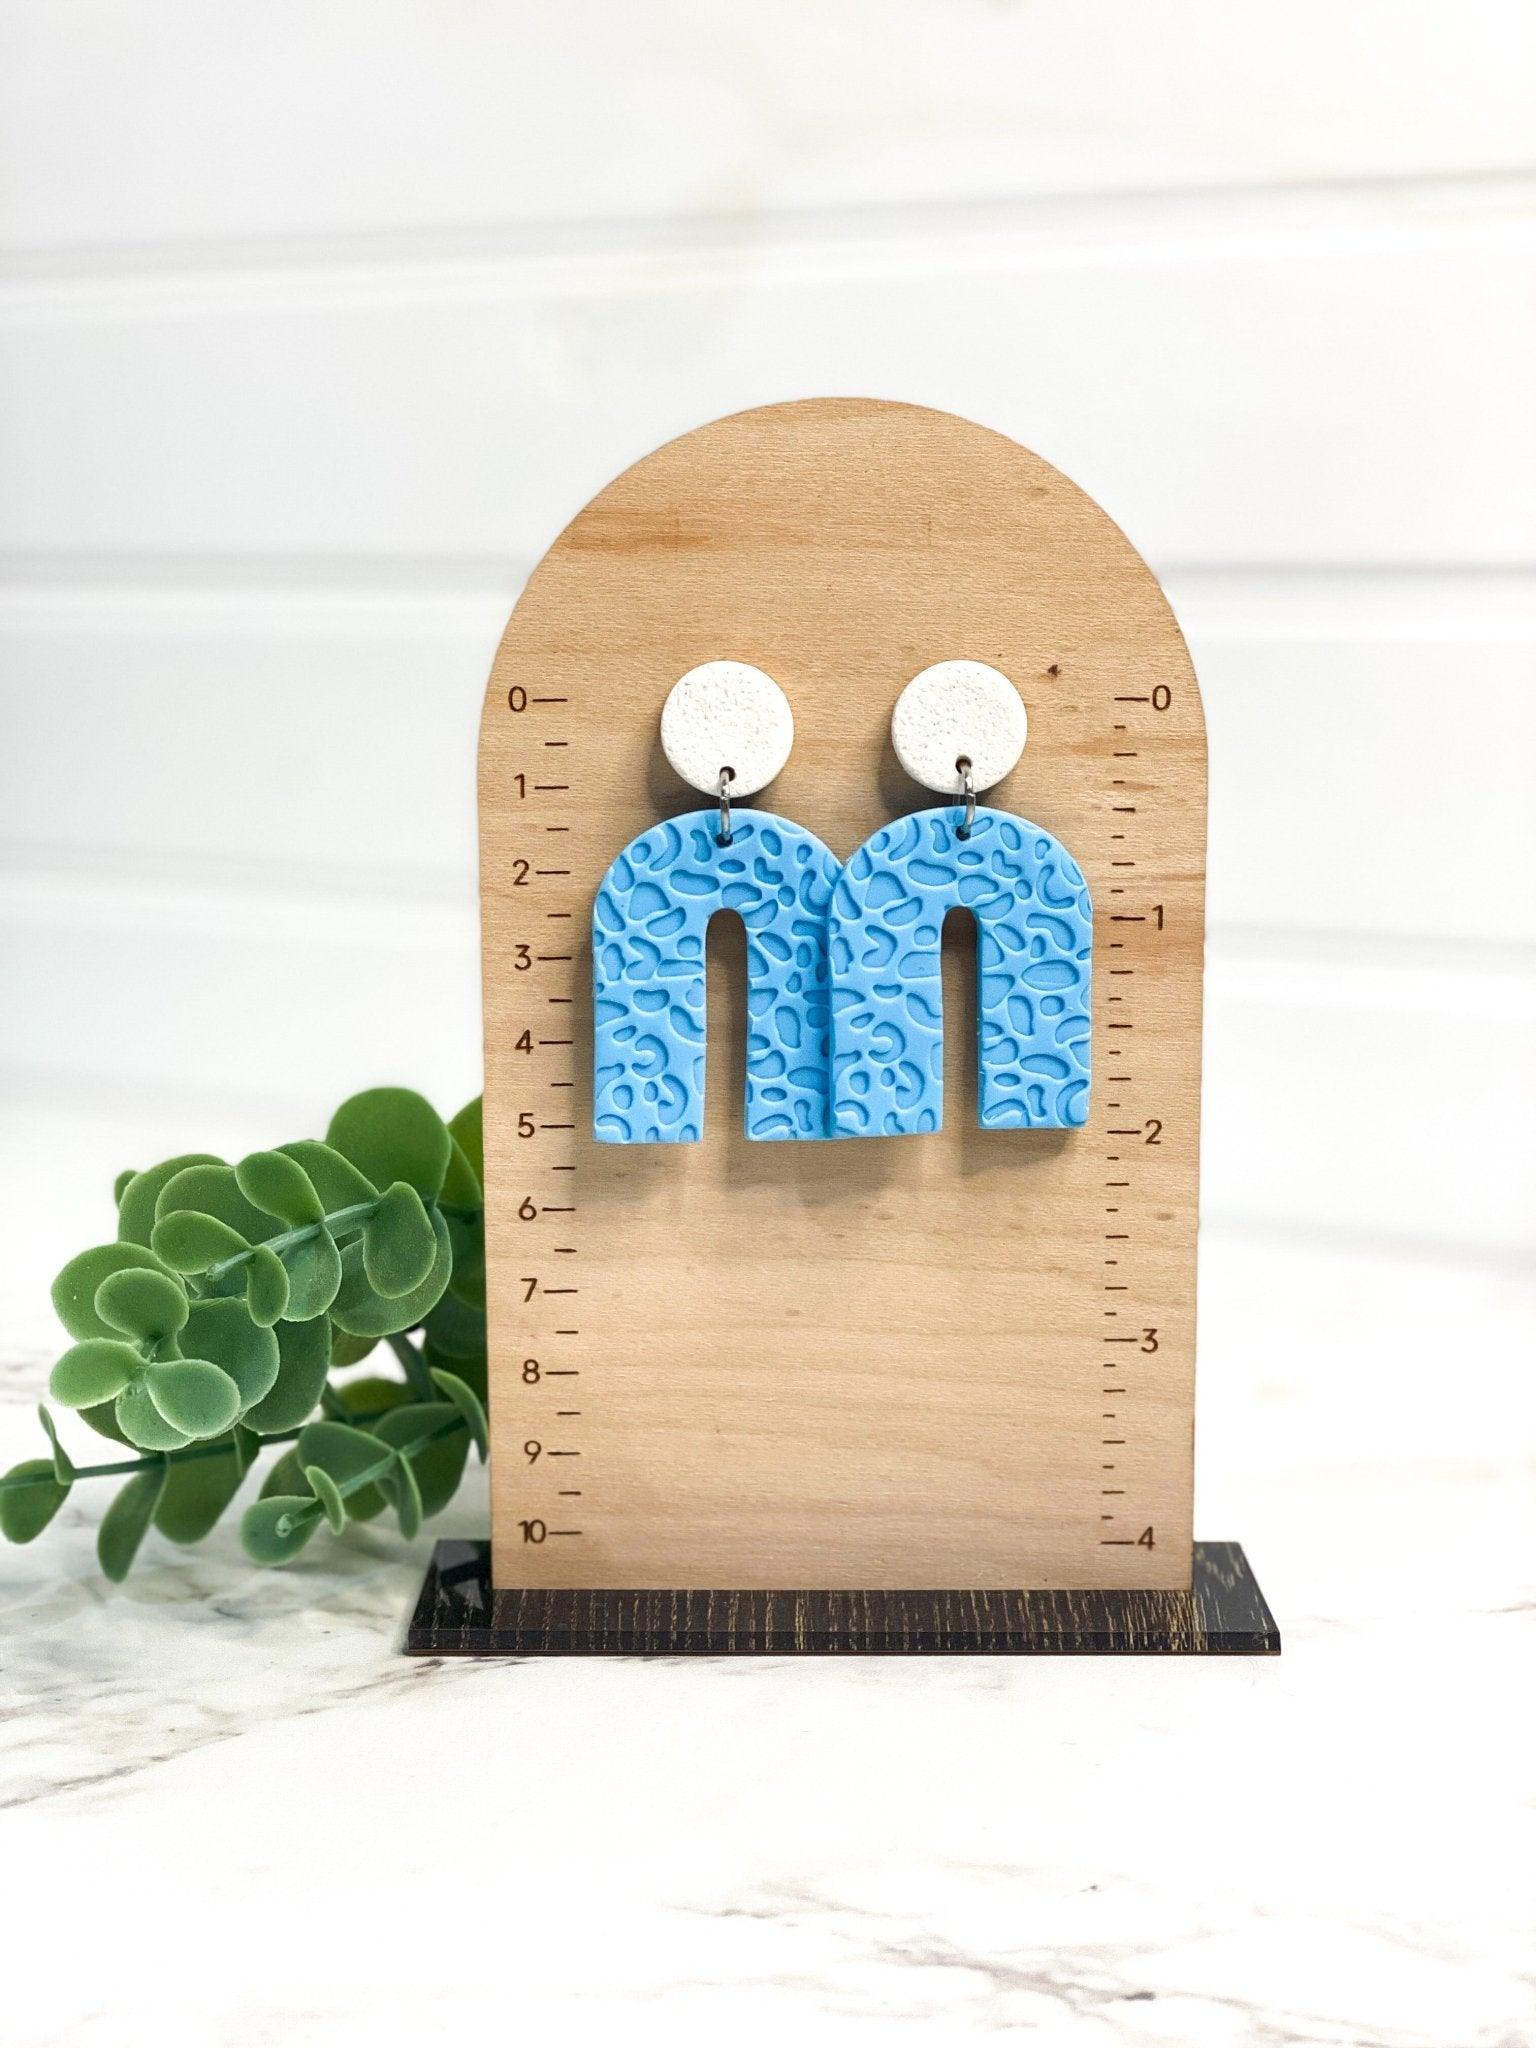 Blue and White College Game Day Earrings - UNC Earrings - Blue Earrings Handmade - College Merch - Gift for College Girl - Harbor to Gulf Co.